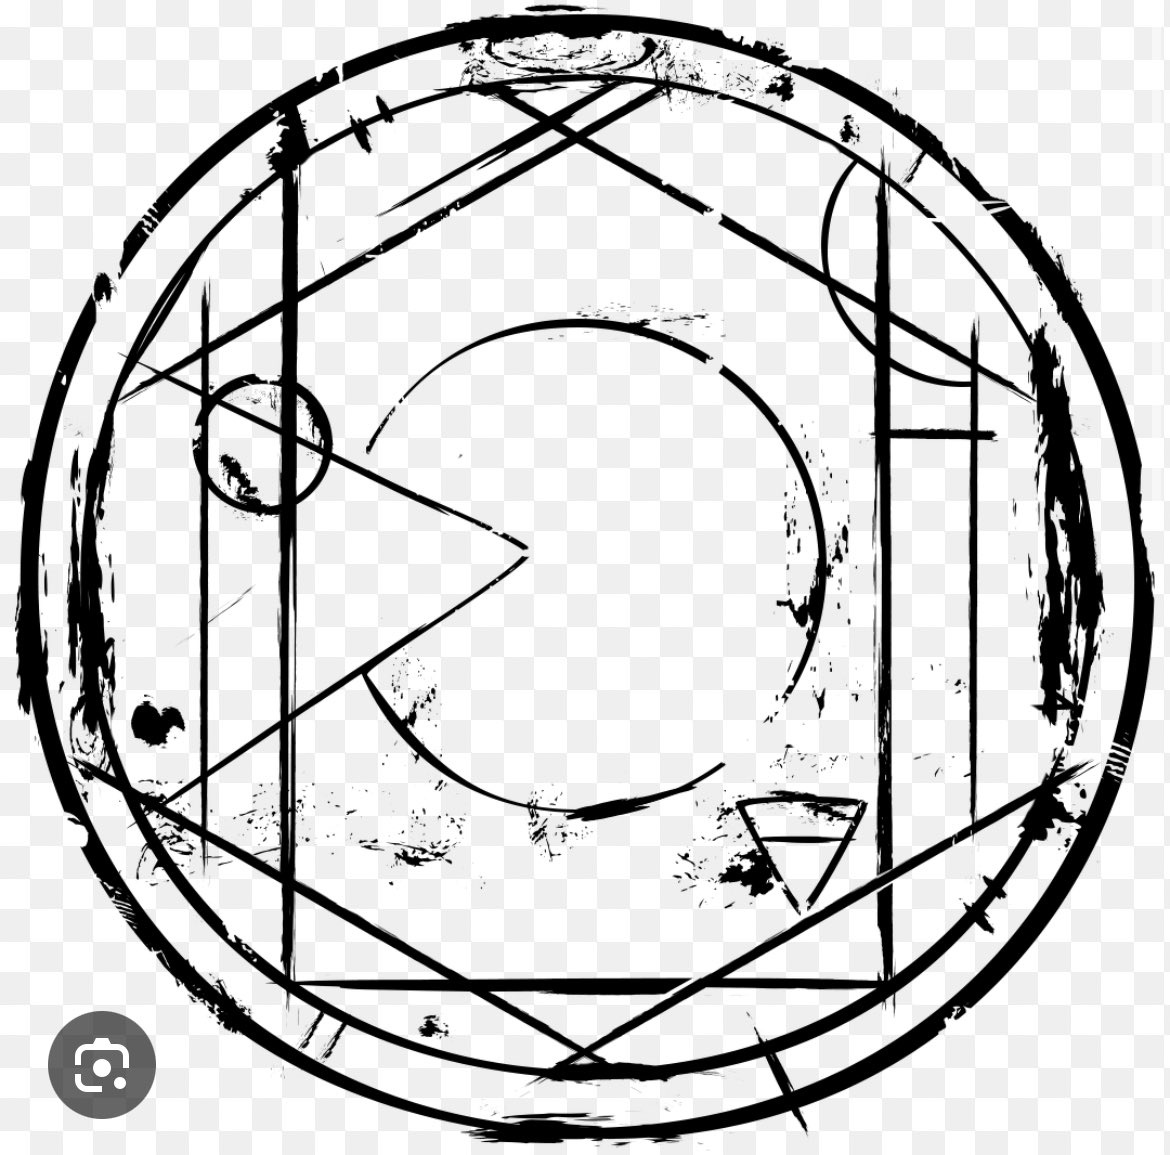 Did you know the pentagram in bendy has witchcraft symbols for “spirit” and “earth” (or water depending on who you ask)